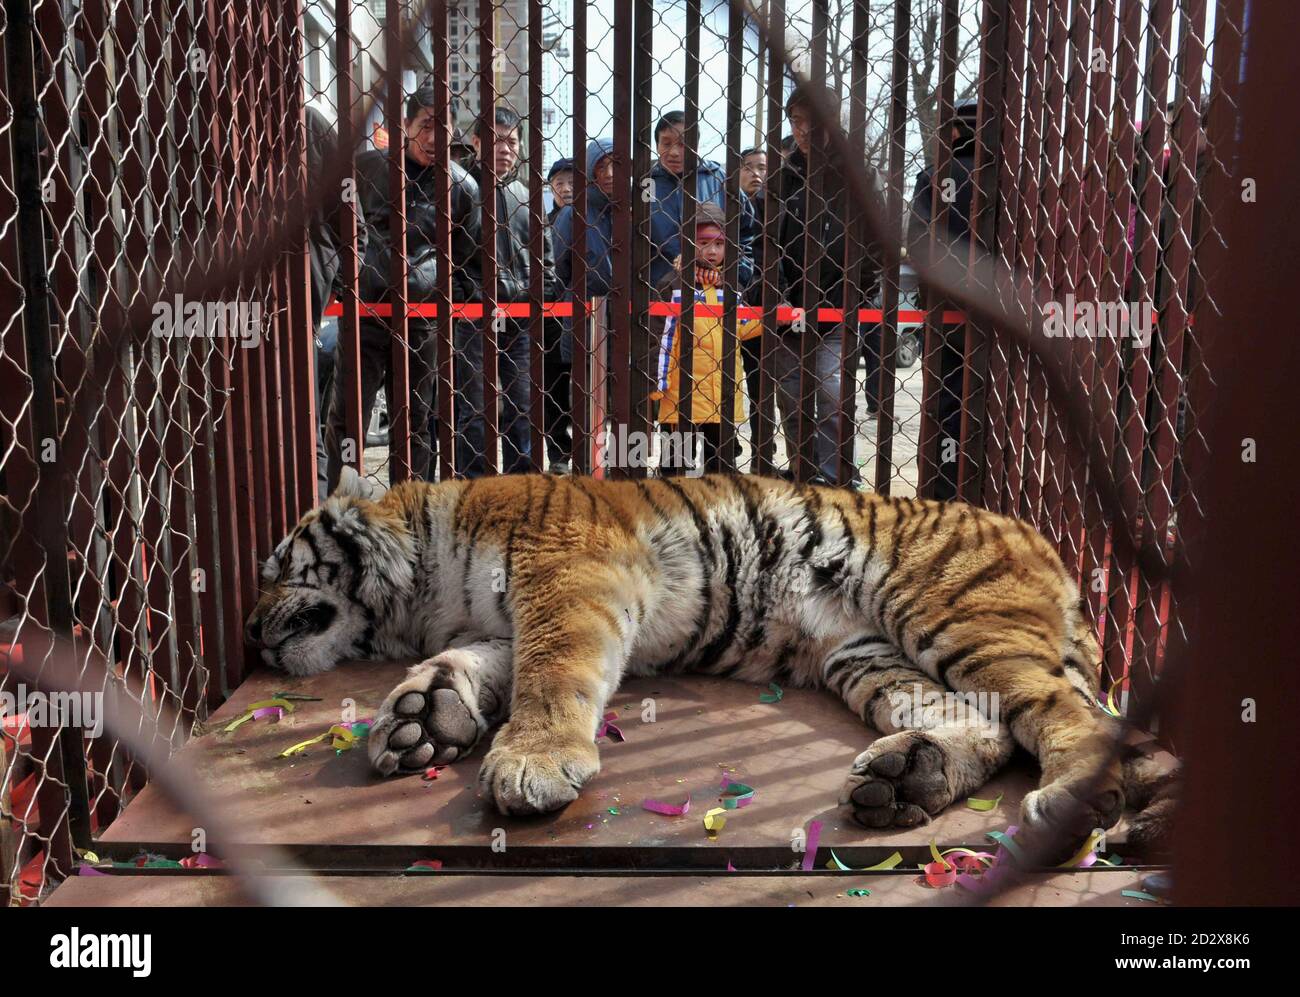 a-northeast-tiger-lies-in-a-cage-during-an-opening-ceremony-of-a-real-estate-project-in-shenyang-liaoning-province-march-13-2010-the-real-estate-company-presented-the-tiger-during-the-ceremony-to-raise-money-to-feed-tigers-after-at-least-11-tigers-died-of-hunger-and-malnutrition-in-a-chinese-zoo-this-year-local-media-reported-on-thursday-2010-is-the-year-of-the-tiger-according-to-the-lunar-calendar-reuterssheng-li-china-tags-animals-society-business-2D2X8K6.jpg